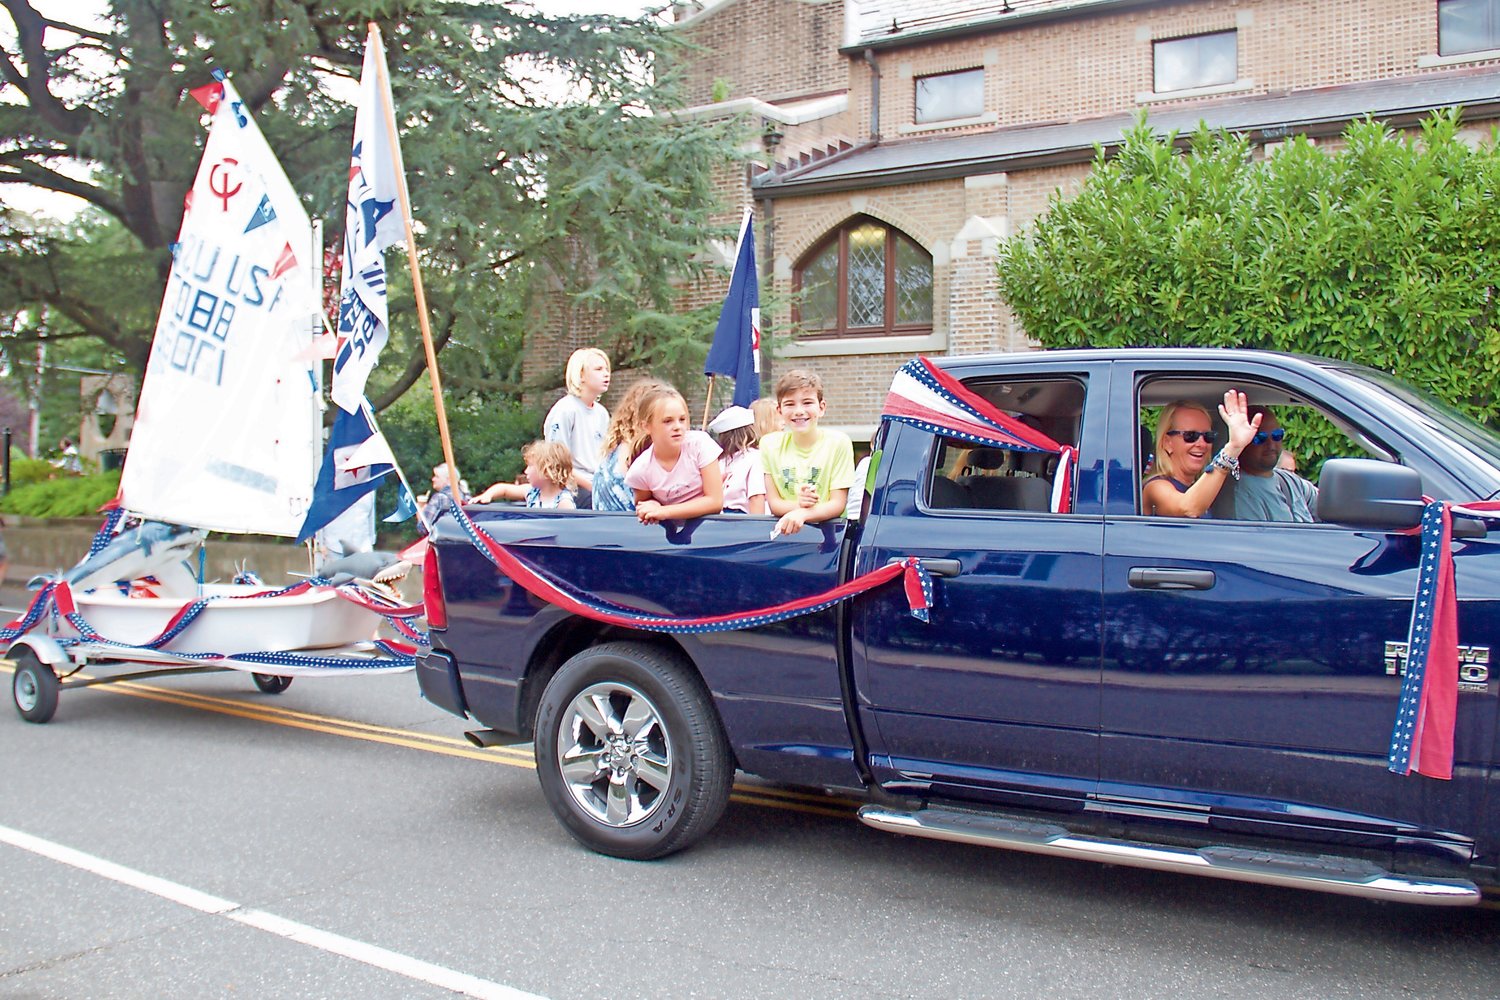 Locals decorated their cars and boats in red, white and blue for the parade.